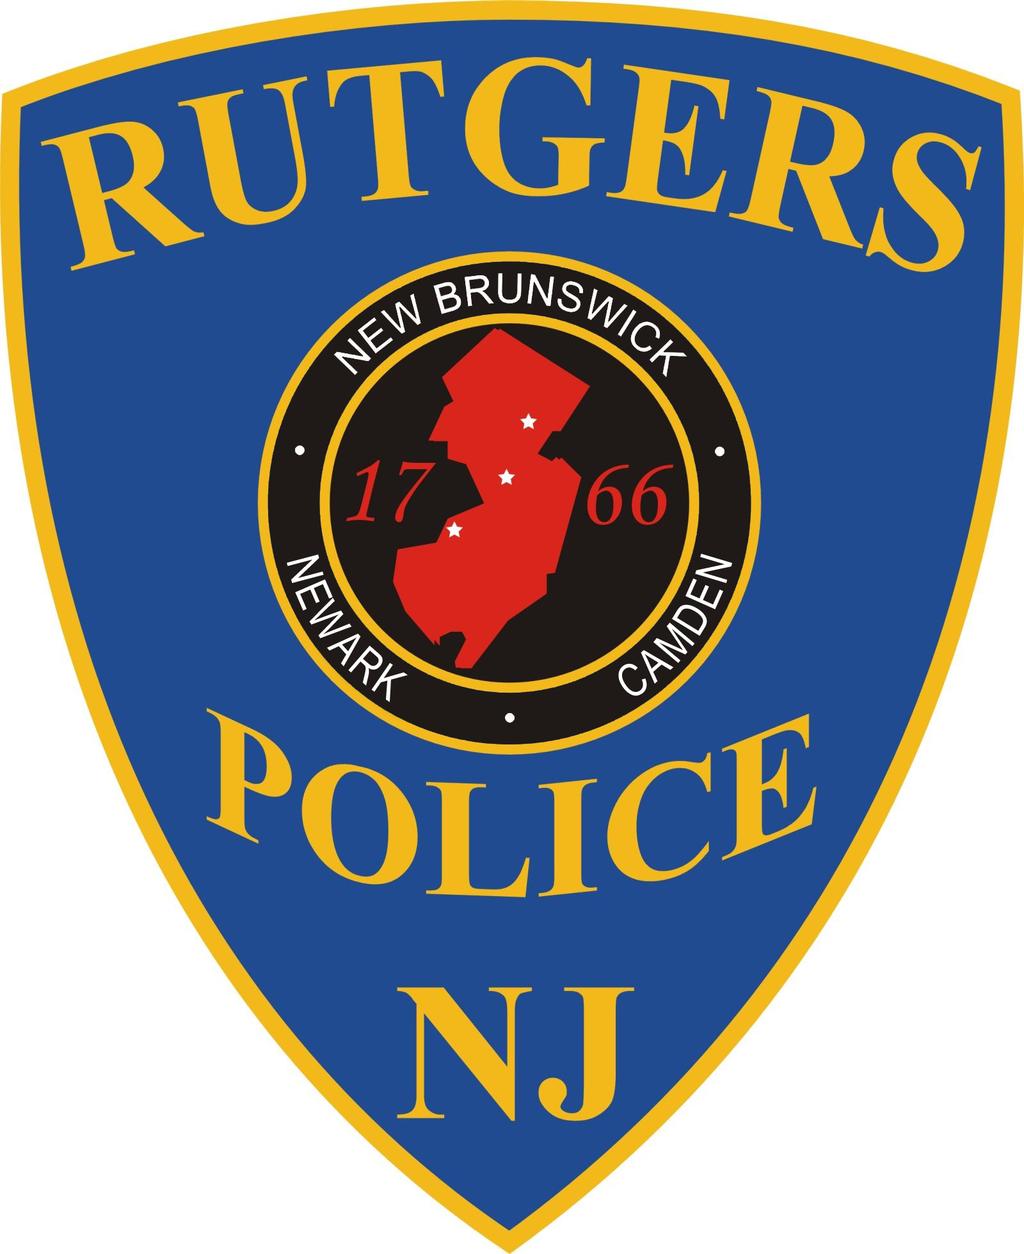 Daily Crime and Fire Safety Log Rutgers PD New Saturday 01 December 2018 Thursday 20 December 2018 181002383 Taking Means Of Conveyance 12/01/18 1144Hrs 12/01/18 0000Hrs 12/01/18 0200Hrs LOT 26(CPN)